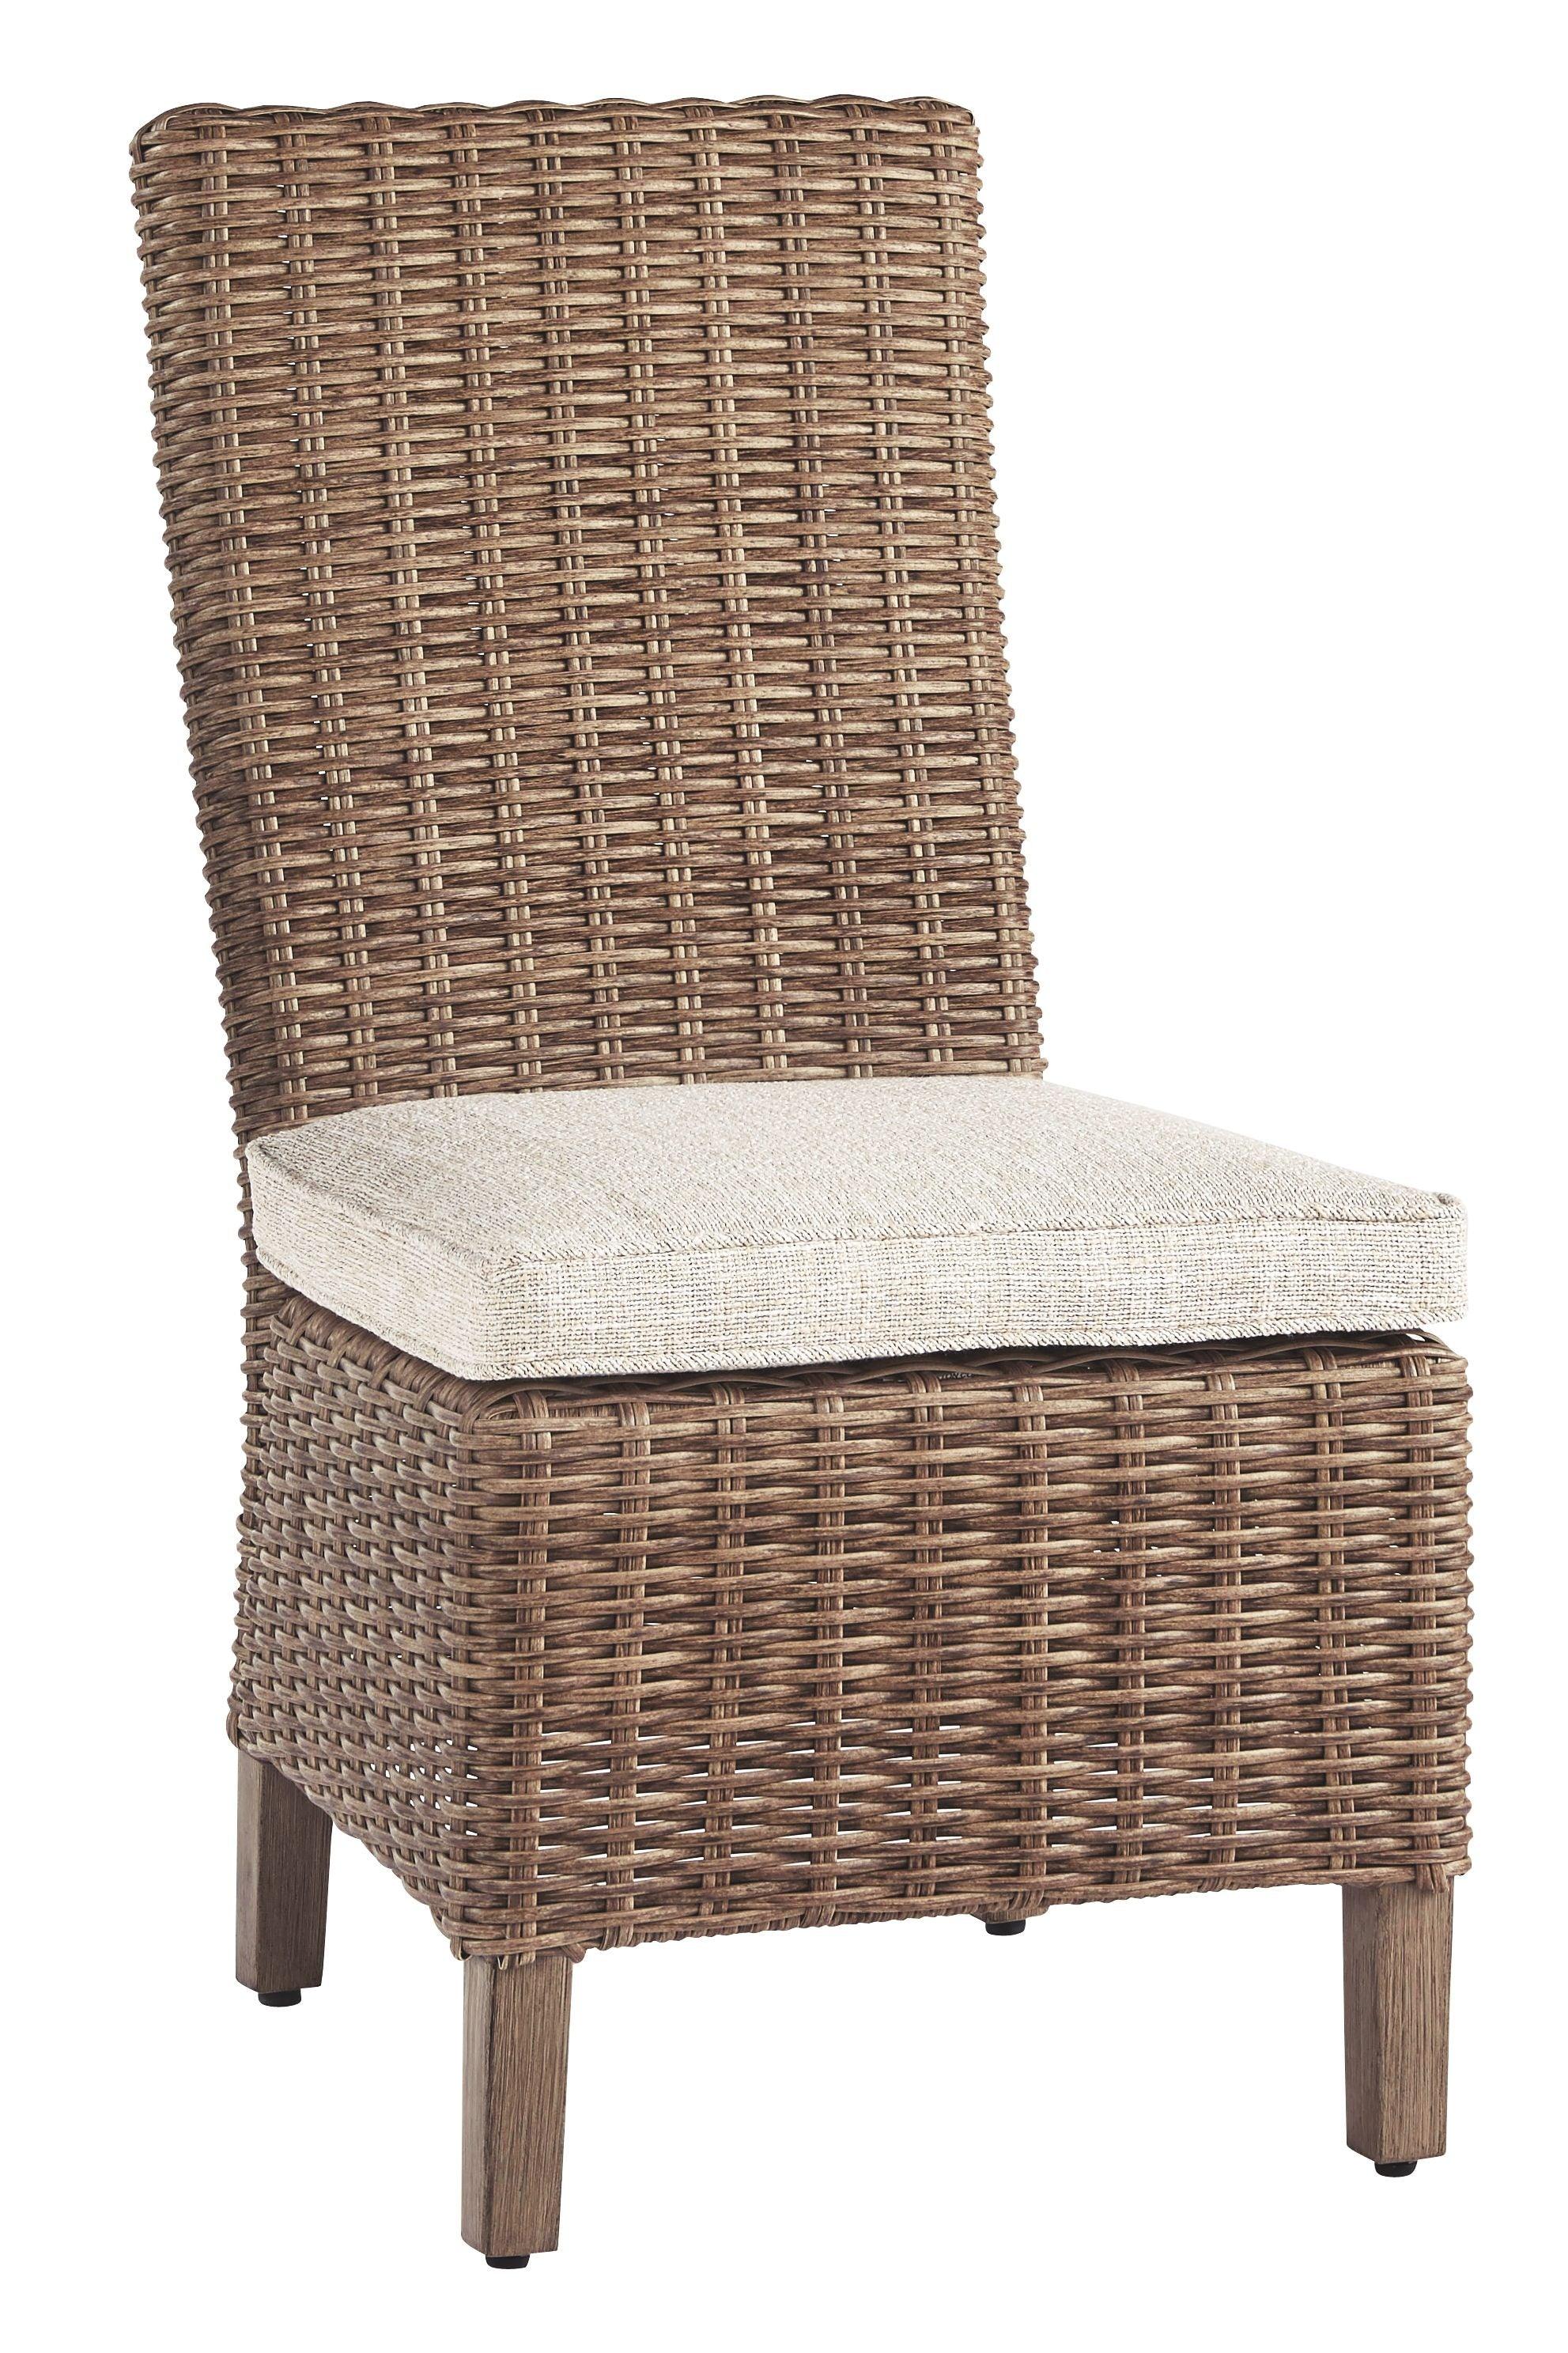 Ashley Furniture - Beachcroft - Outdoor Dining Side Chair - 5th Avenue Furniture